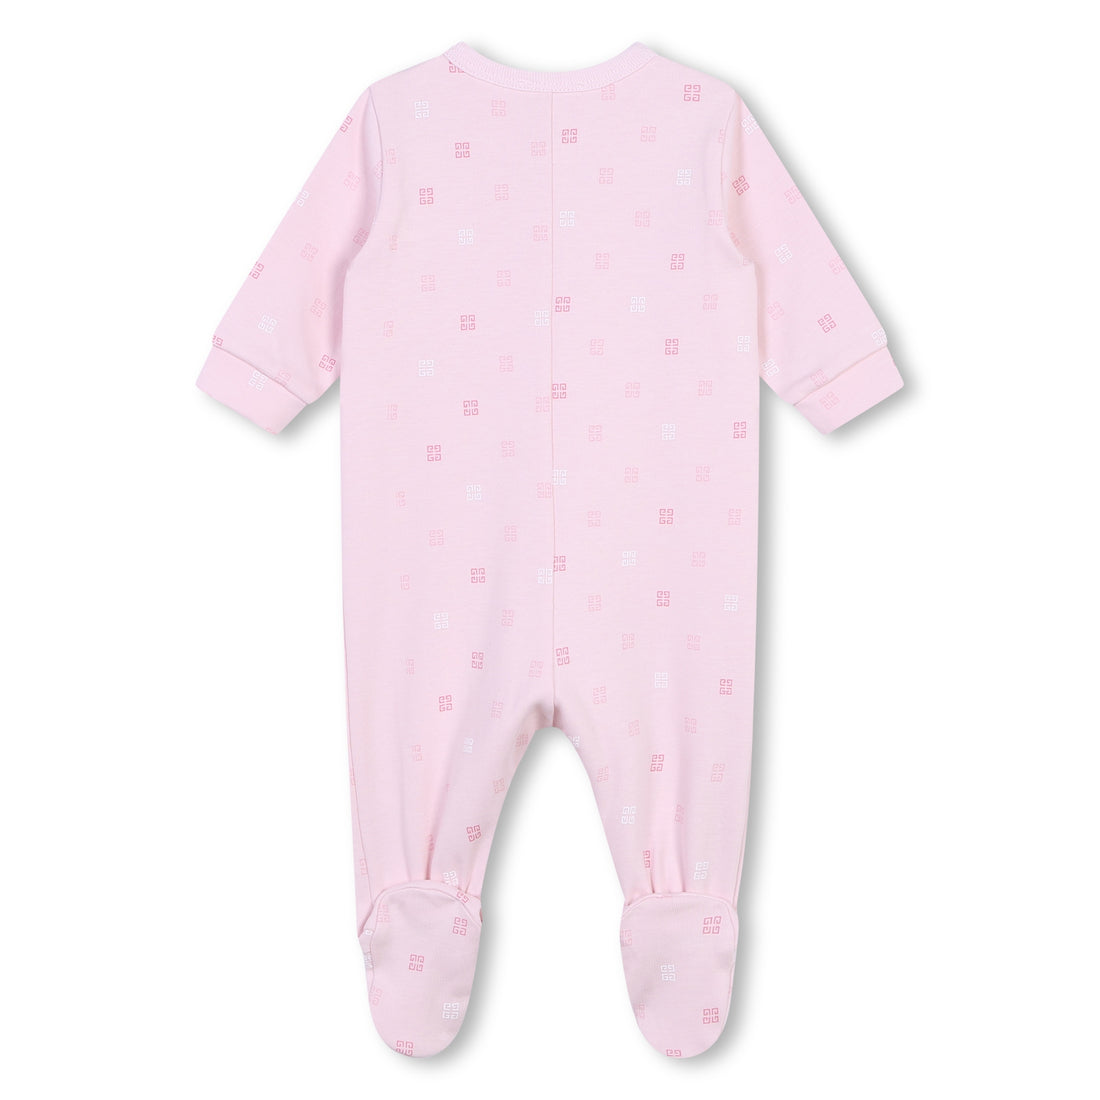 Givenchy Baby Pyjamas Marshmallow Pink - Soft and Cozy Sleepwear | Schools Out